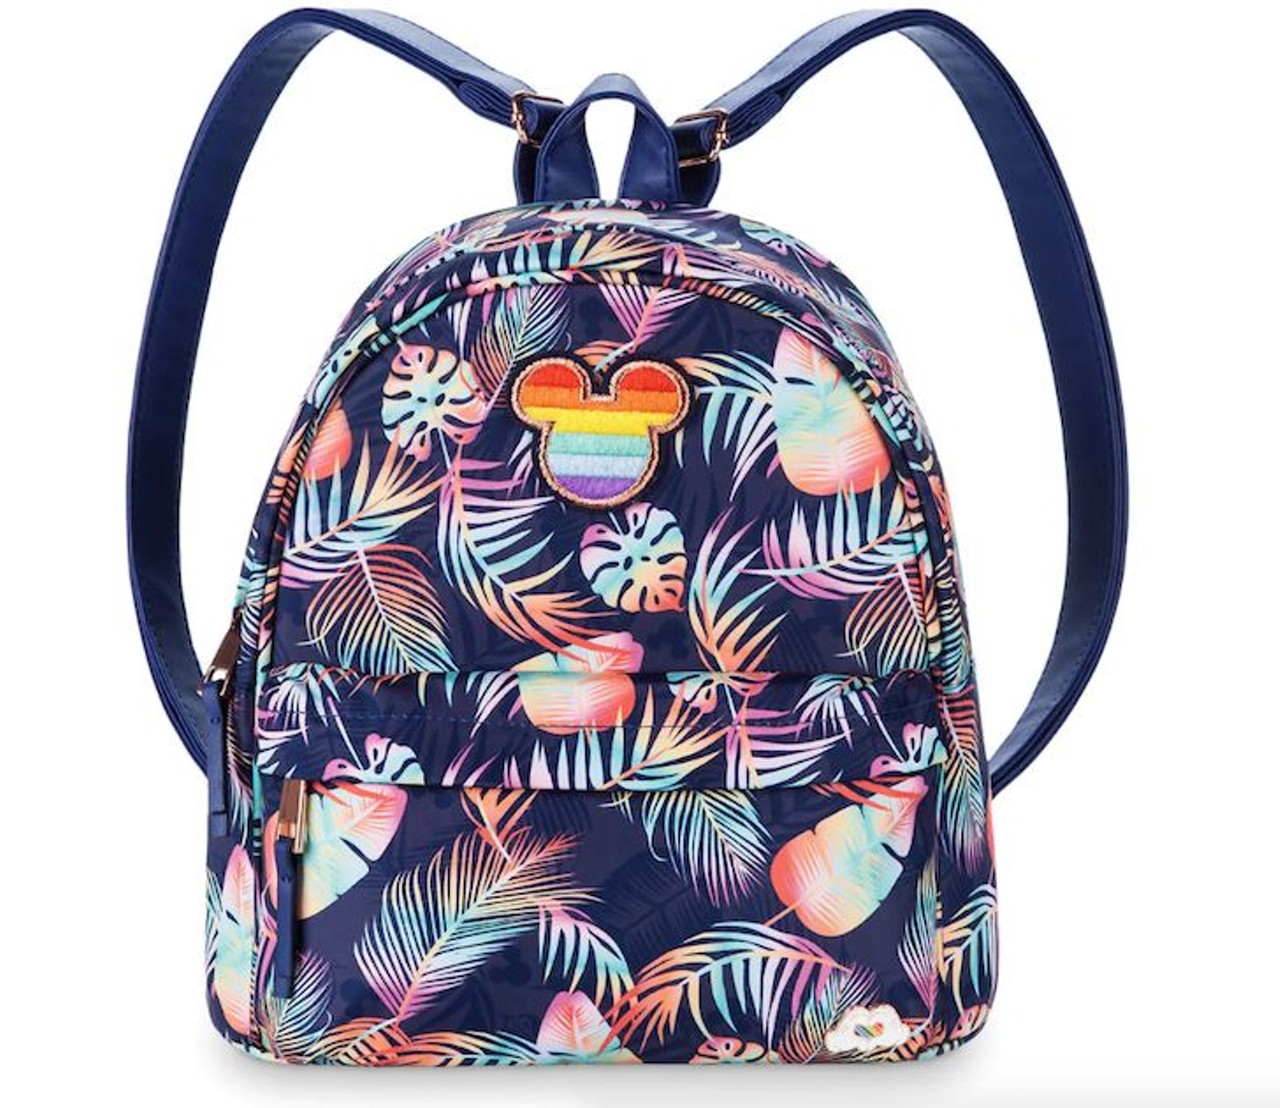 Mickey Mouse Backpack
A navy blue backpack with a tropical leaf rainbow pattern and rose emblems, with rainbow Mickey Mouse patch, $29.95.
Photo via shopDisney